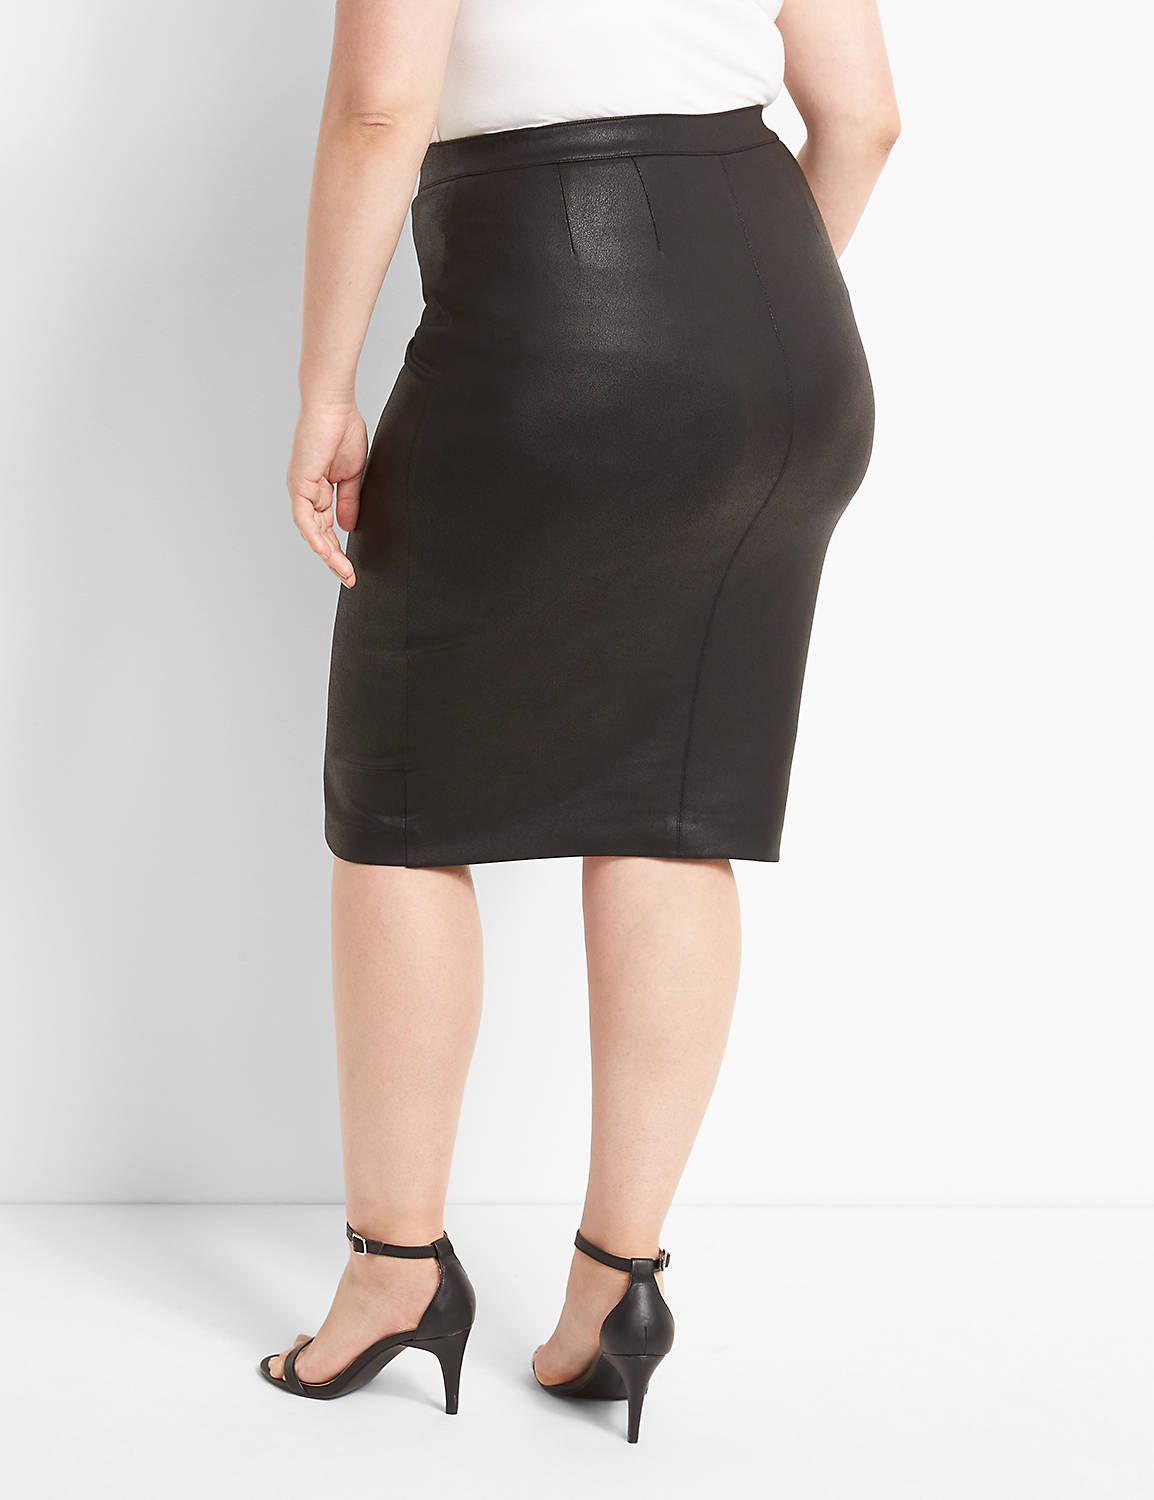 Two-Way Exposed Zipper Pencil Skirt Product Image 2